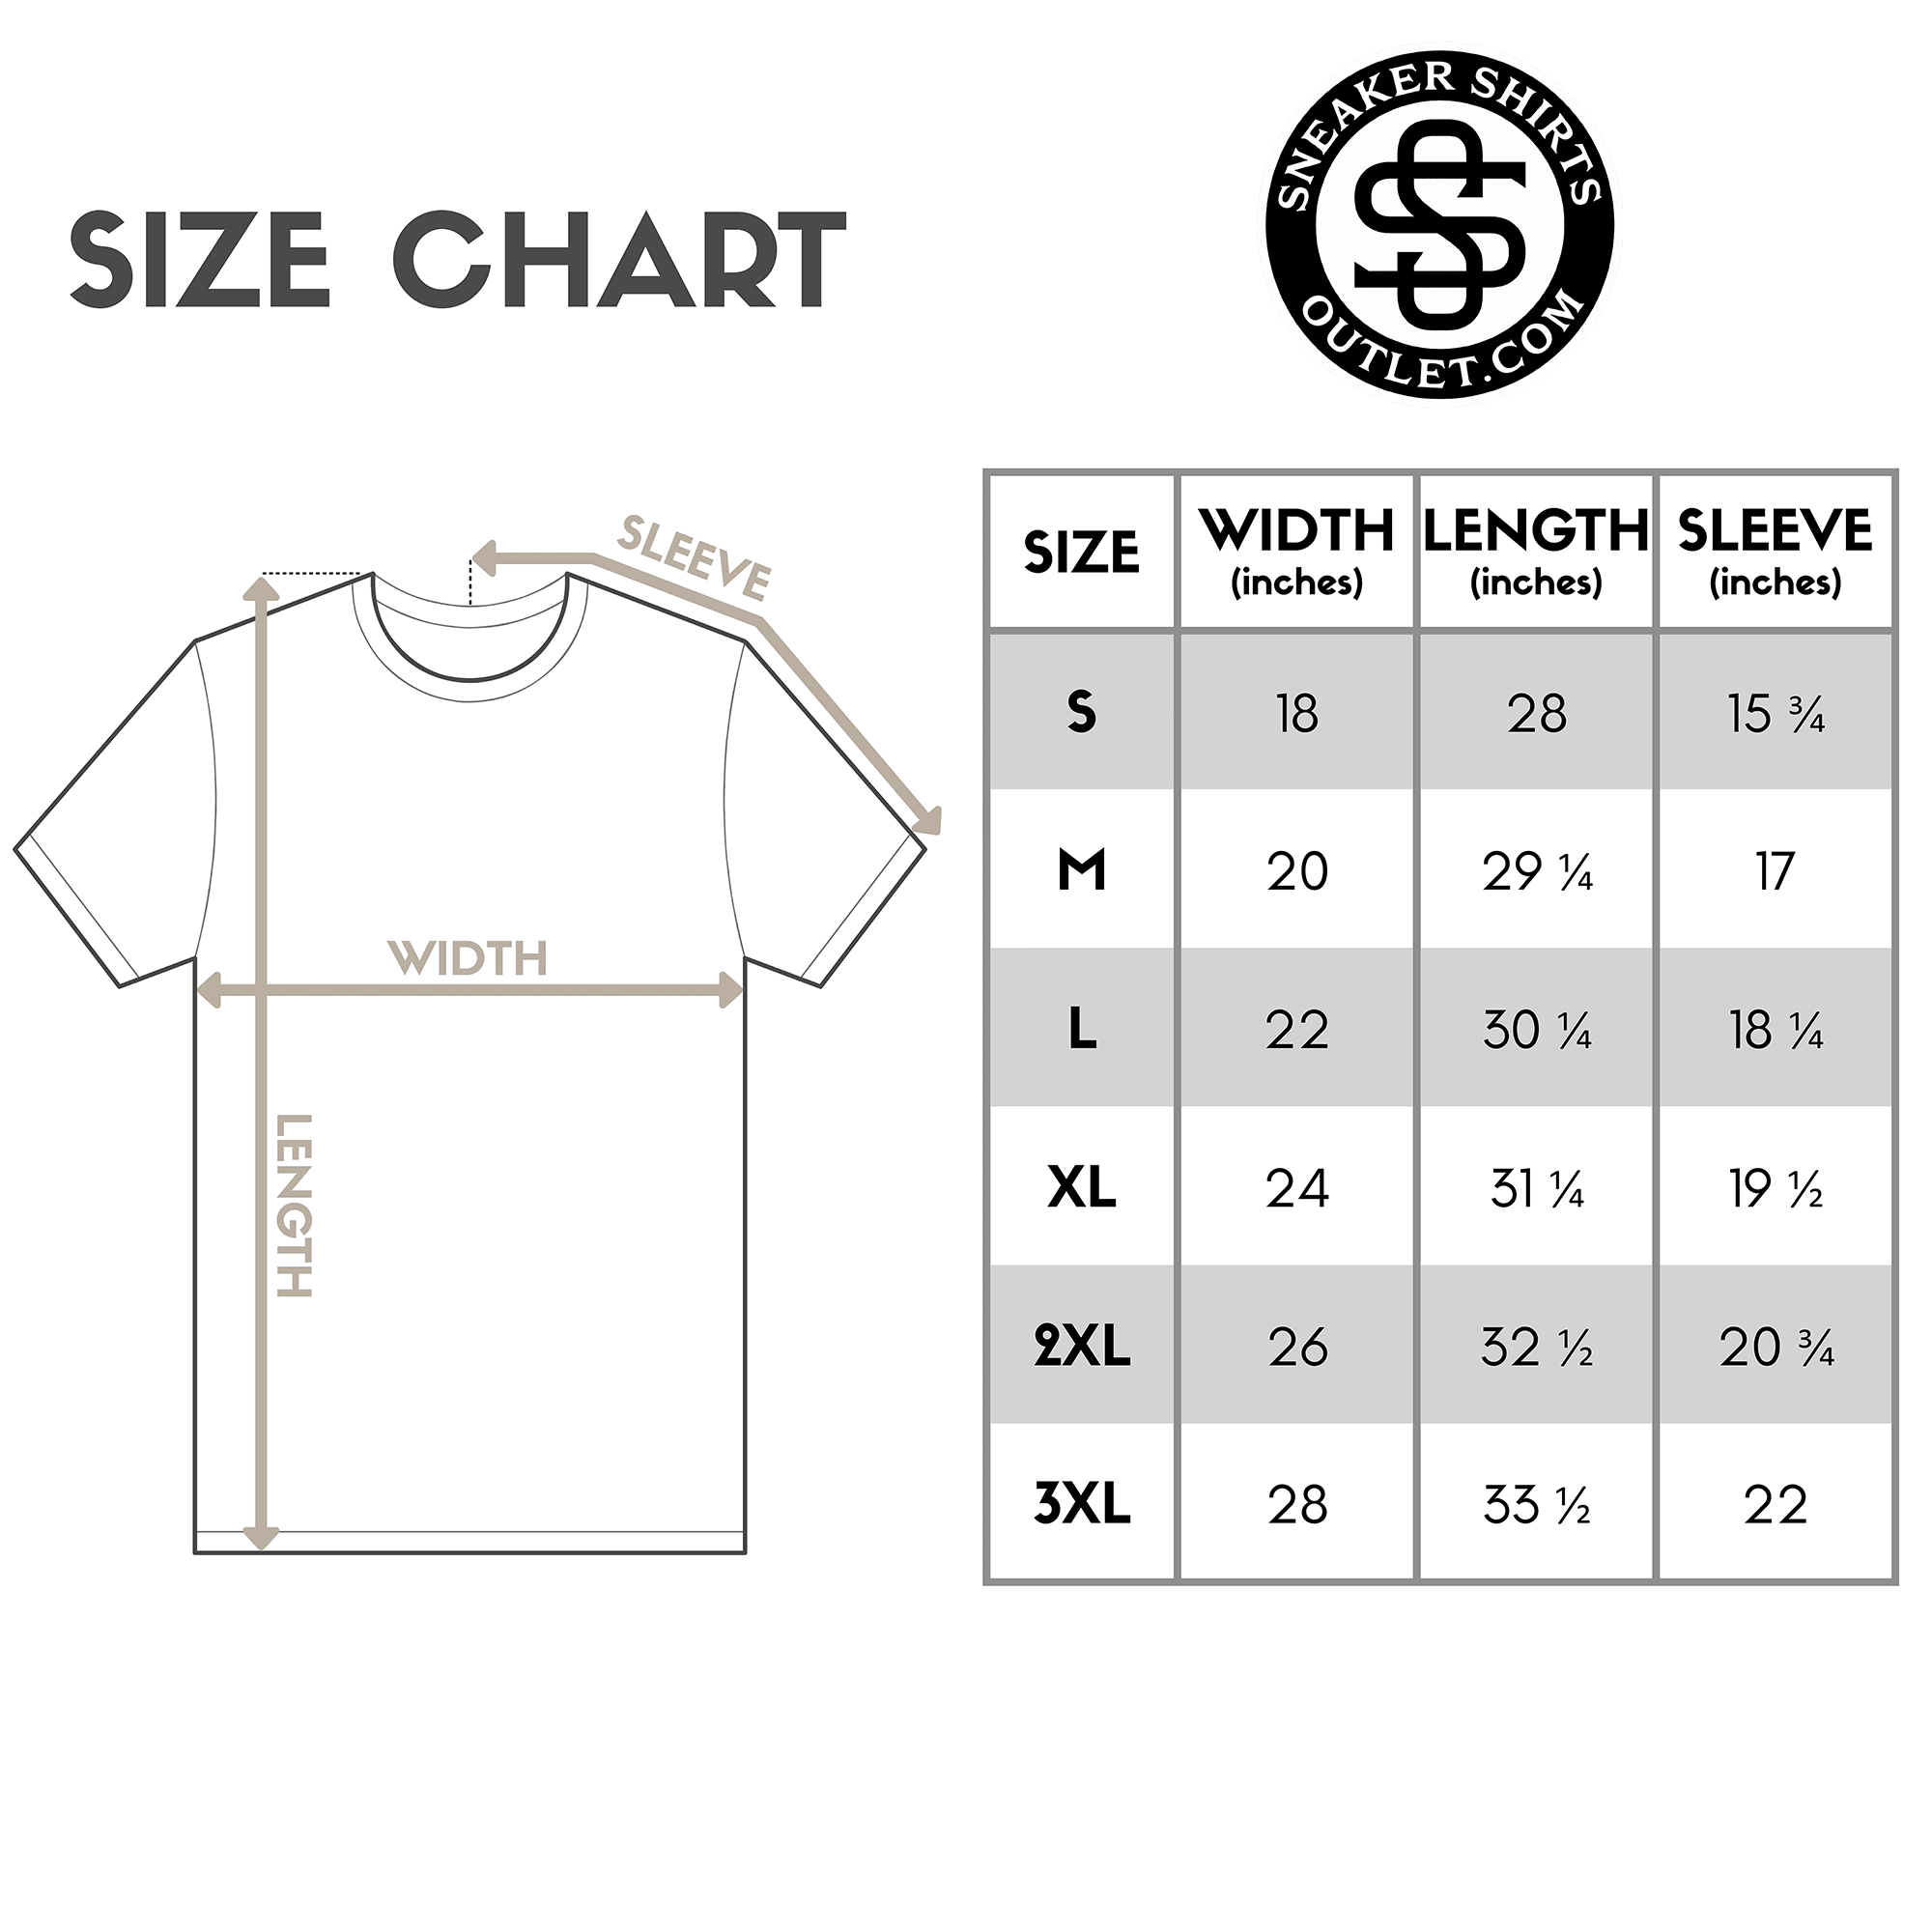 size chart 23 Melting Shirt AJ 13 Very Berry Low GS photo